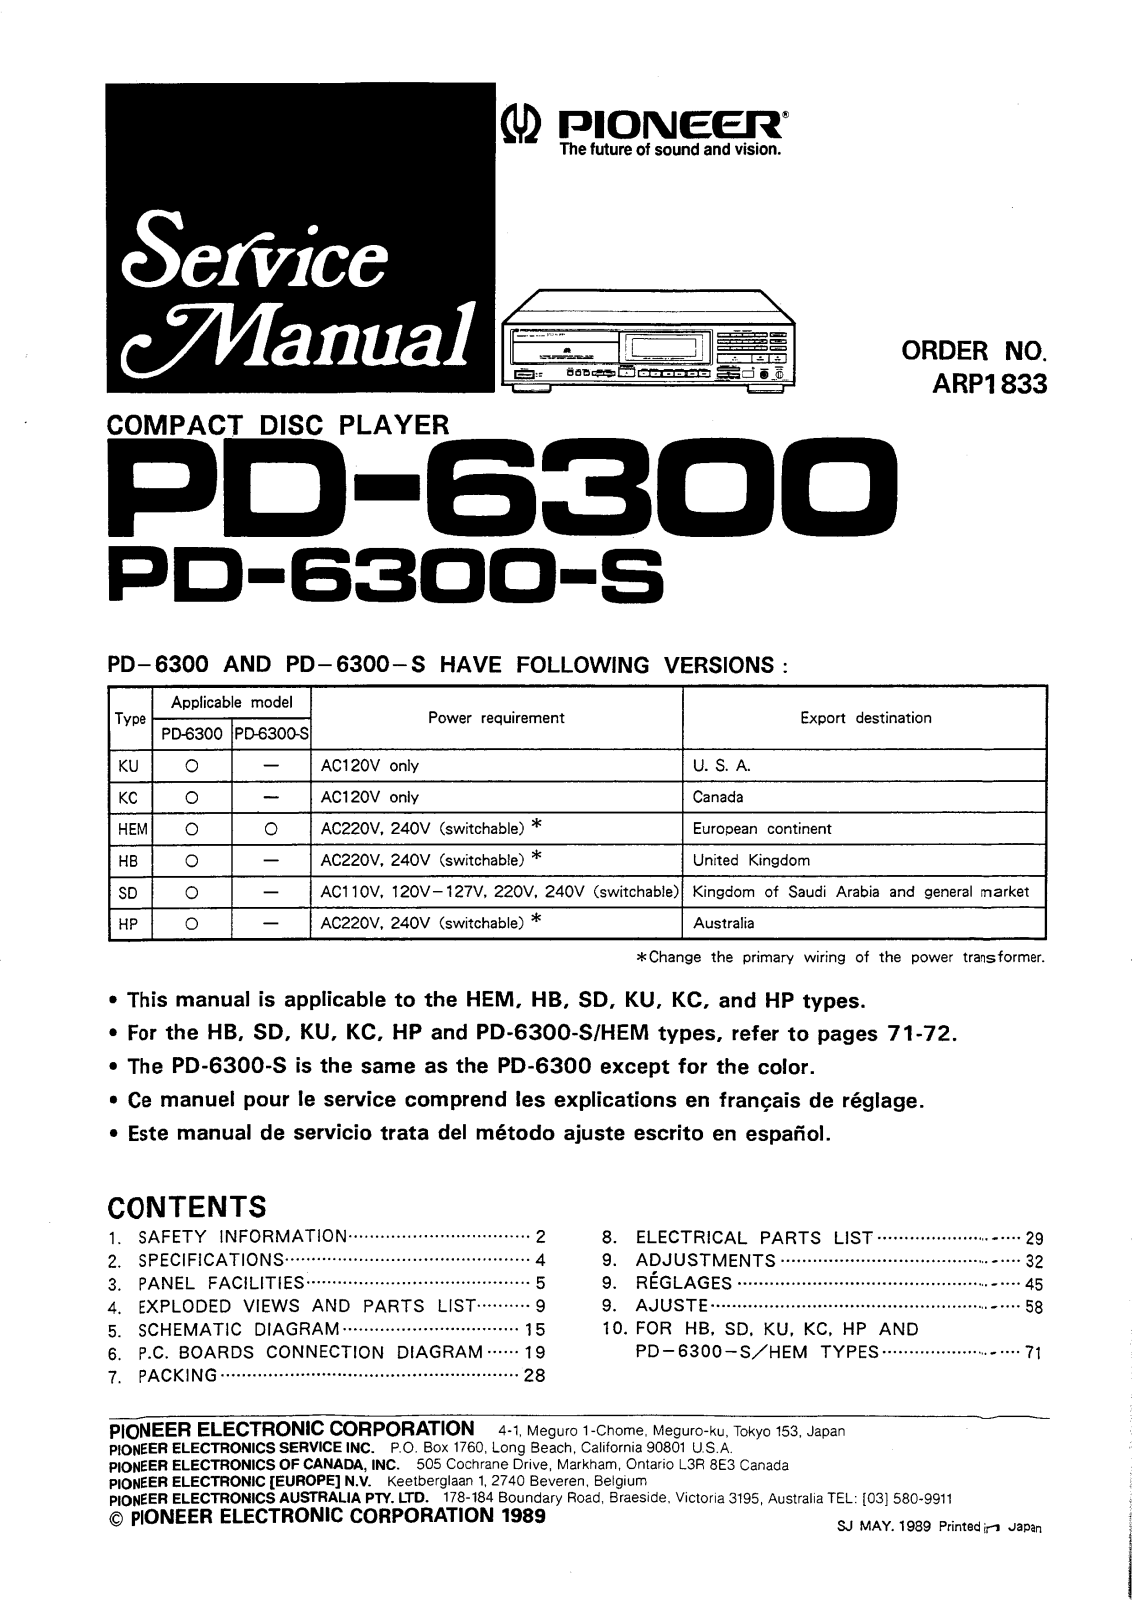 Pioneer PD-6300, PD-6300-S Service manual